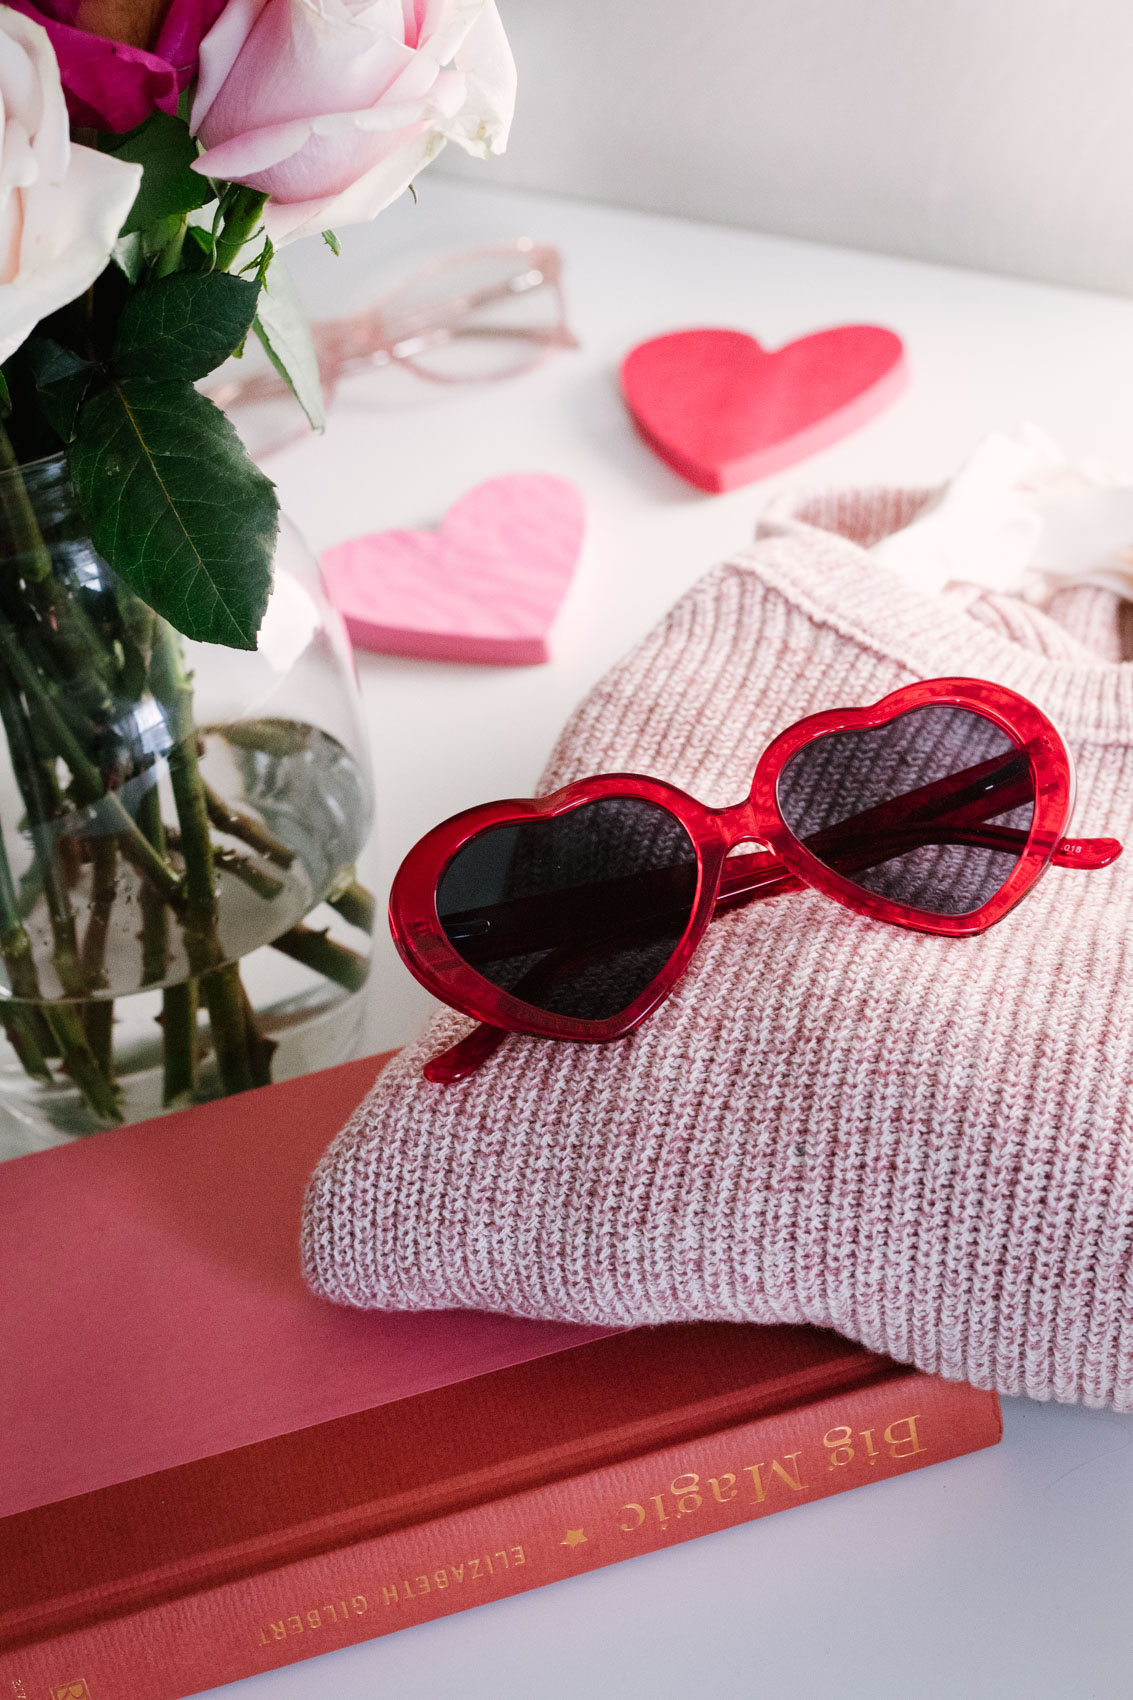 Product photography of red heart sunglasses for Valentine's Day